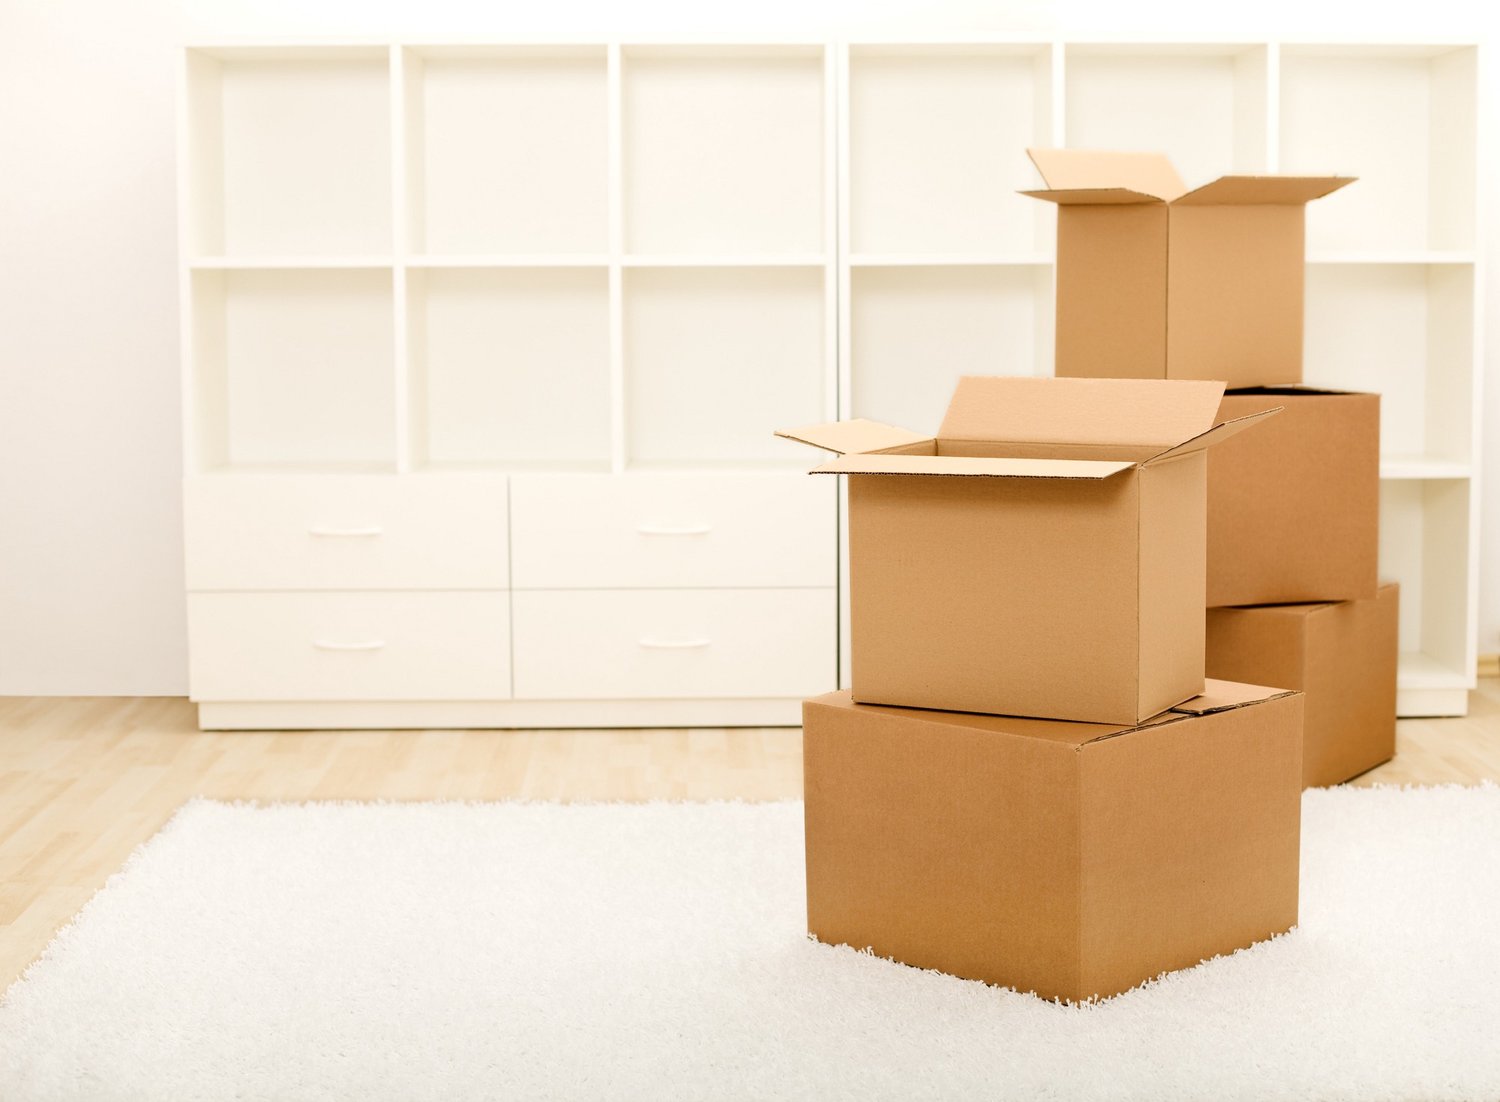 The Best Way to Pack for a Stress-Free Move